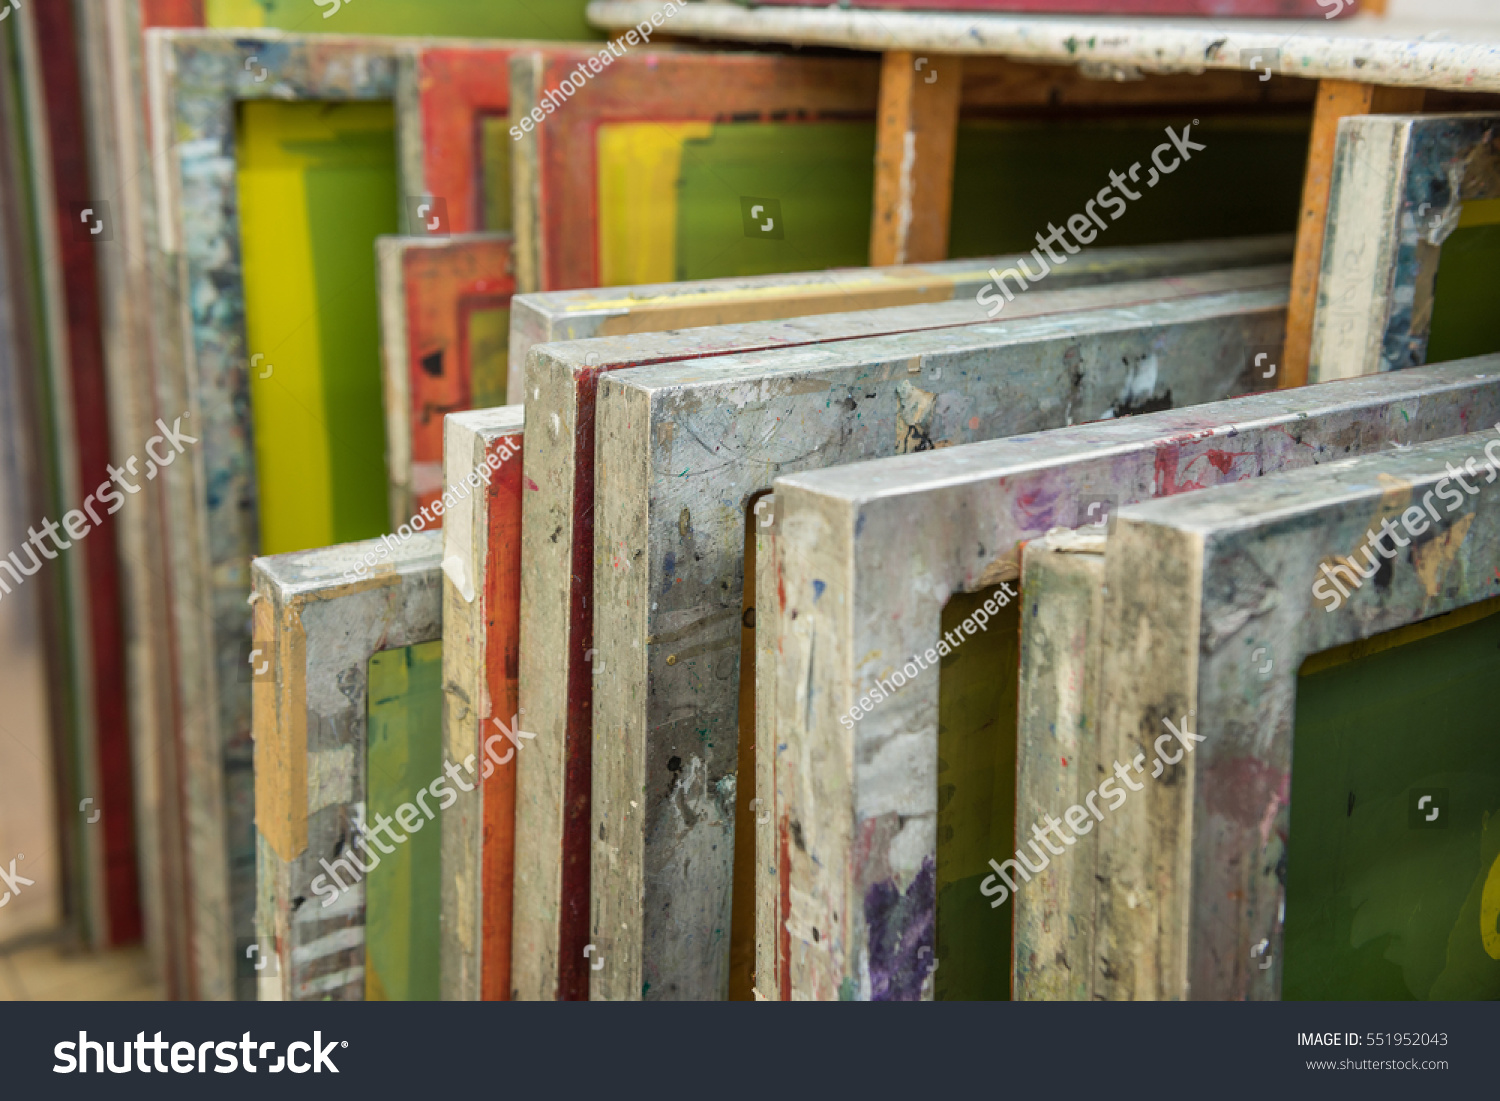 Silk screen printing screens stored in a wooden rack ready for printing. #551952043